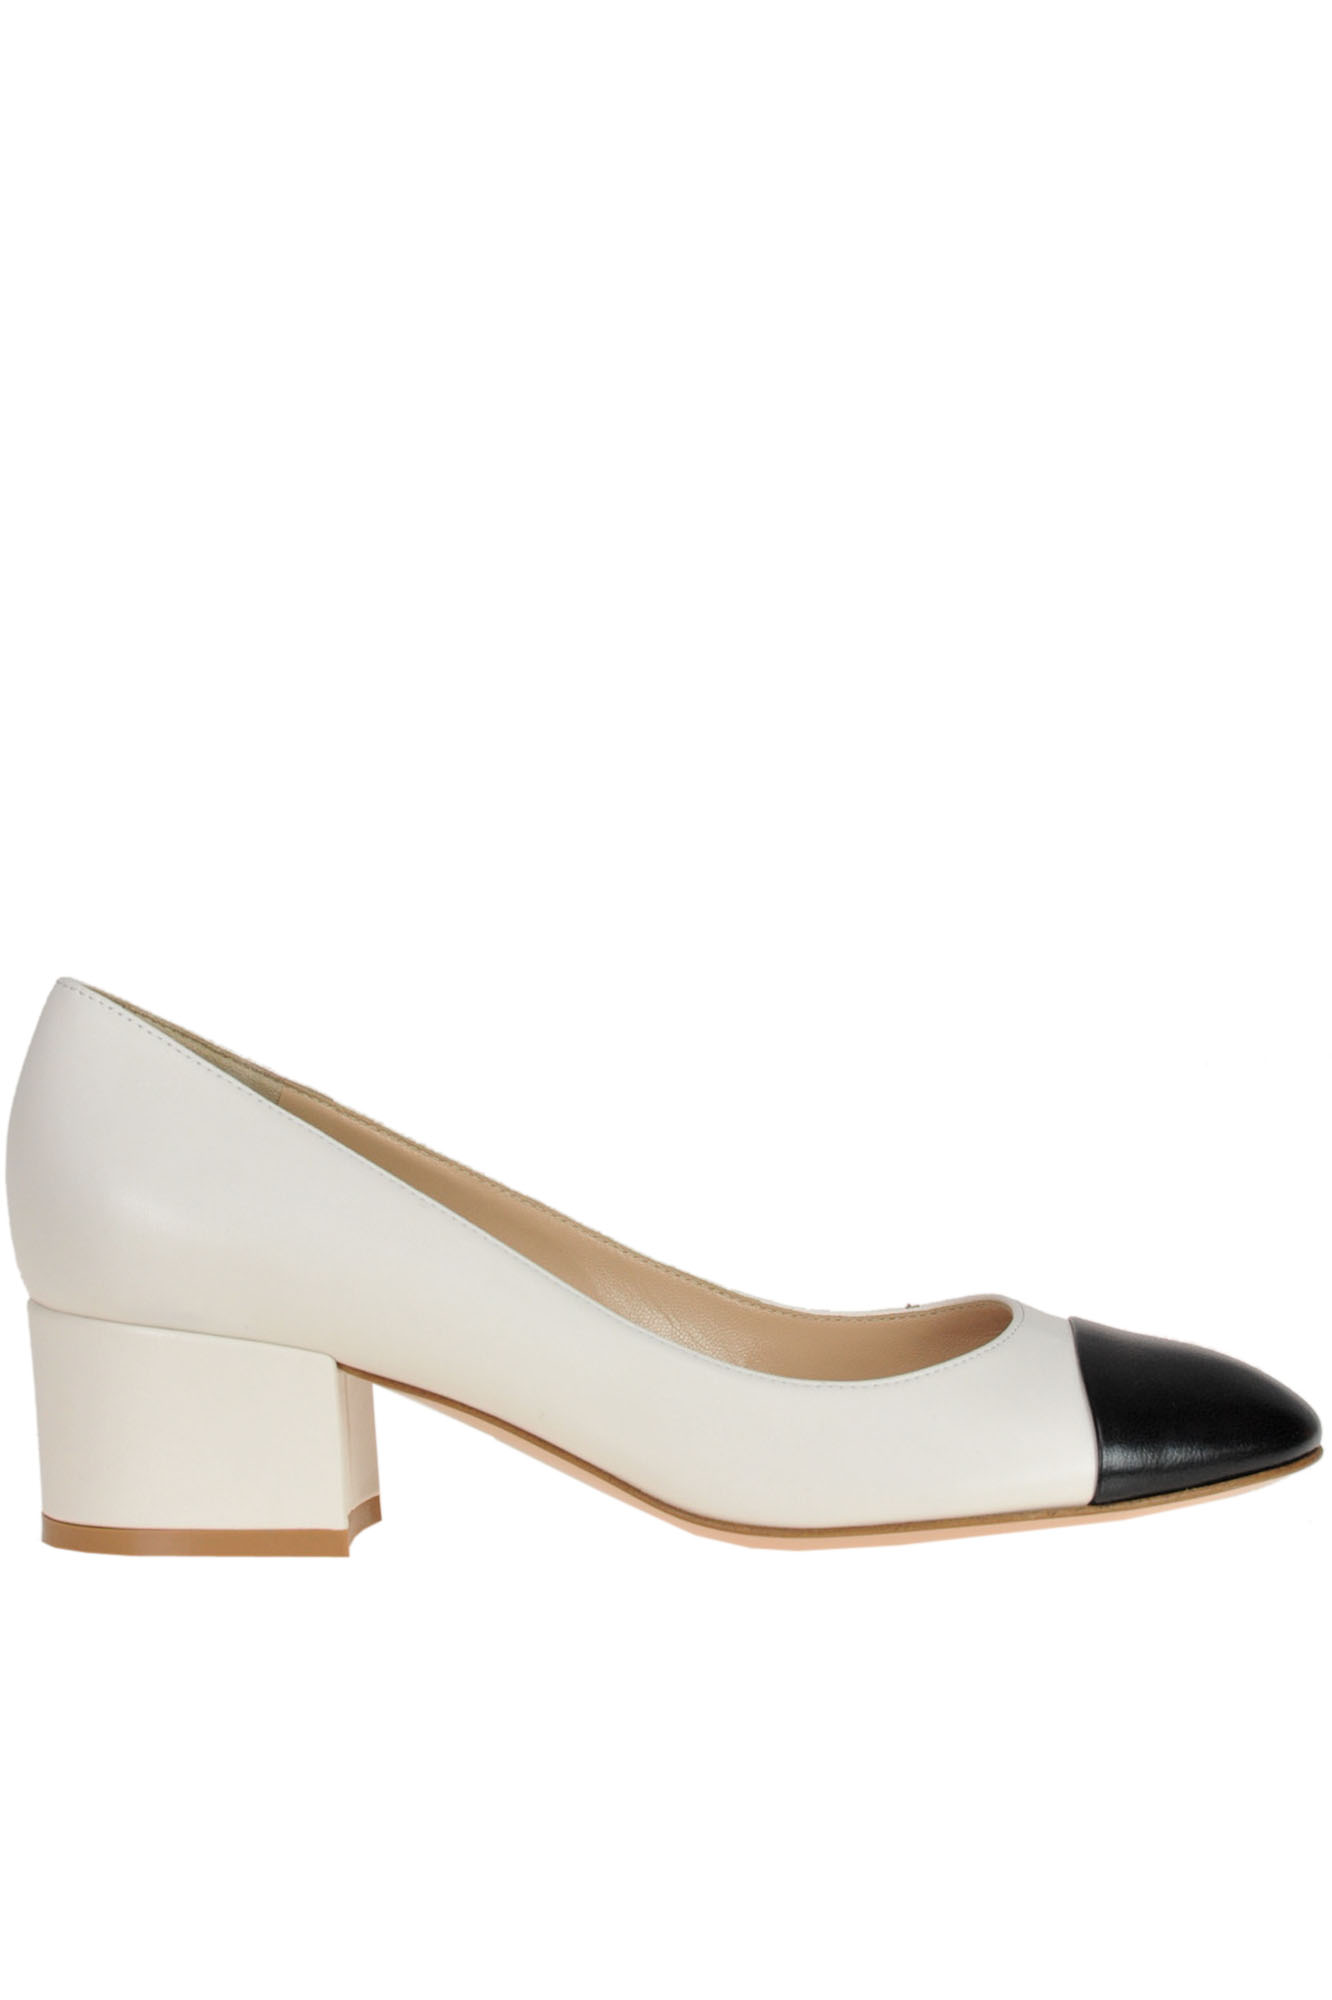 Gianvito Rossi Leather Pumps In Ivory